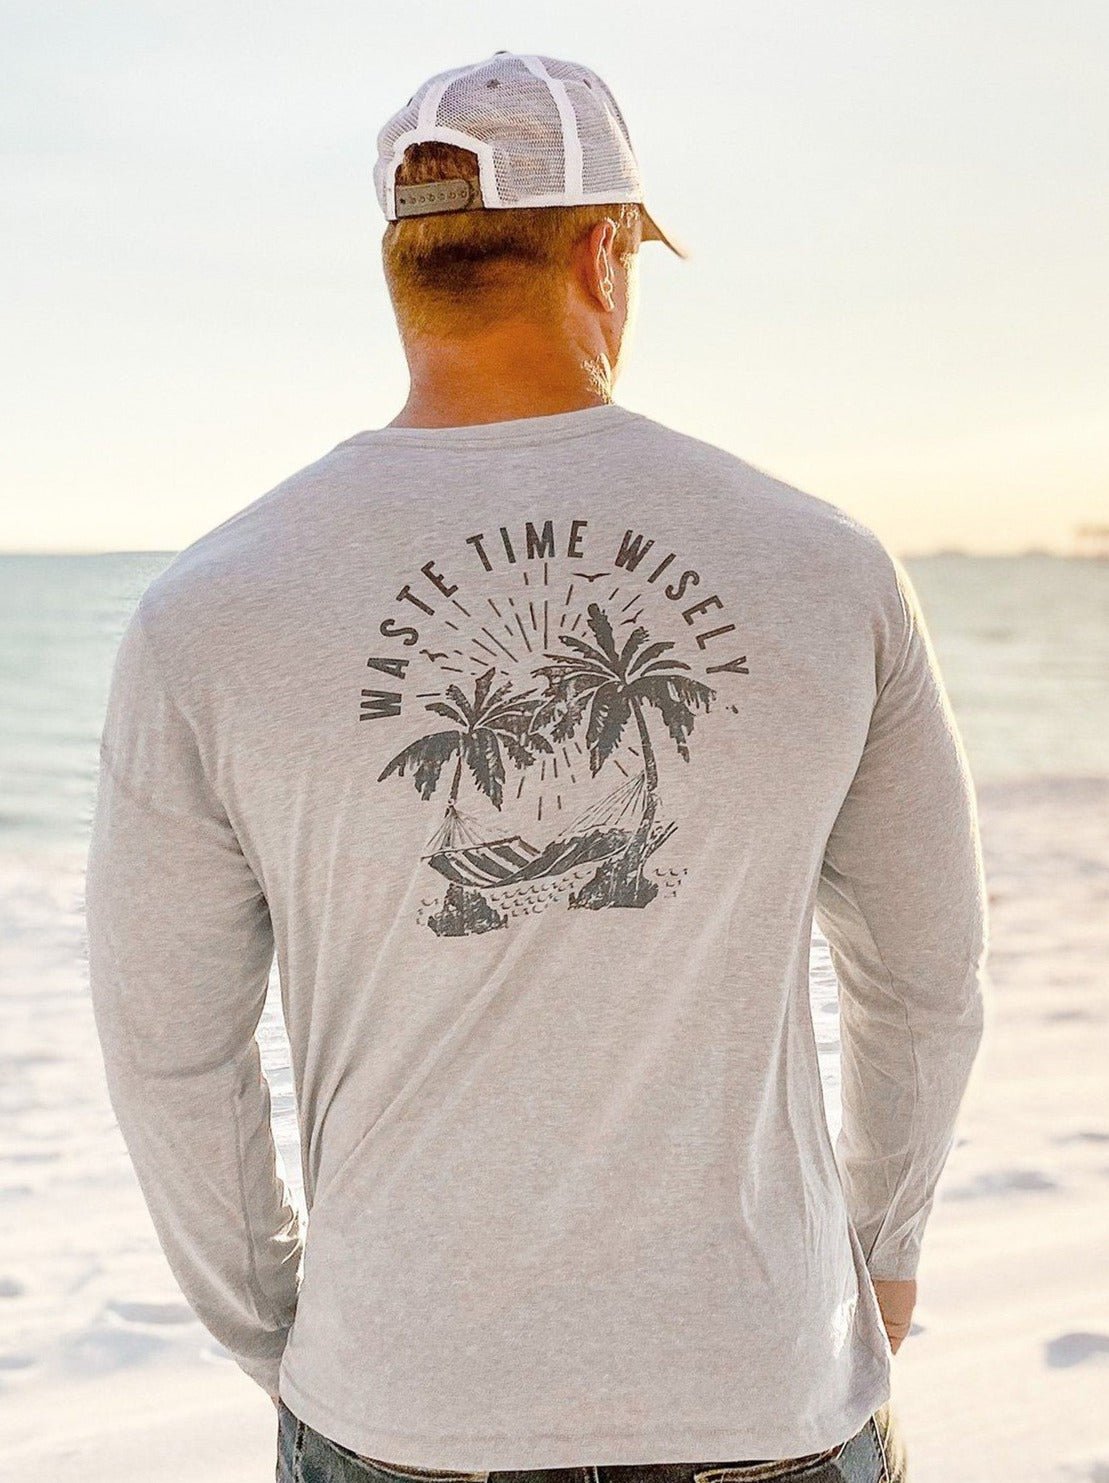 Waste Time Wisely Long Sleeve T - Shirt - 30A Gear - men tee